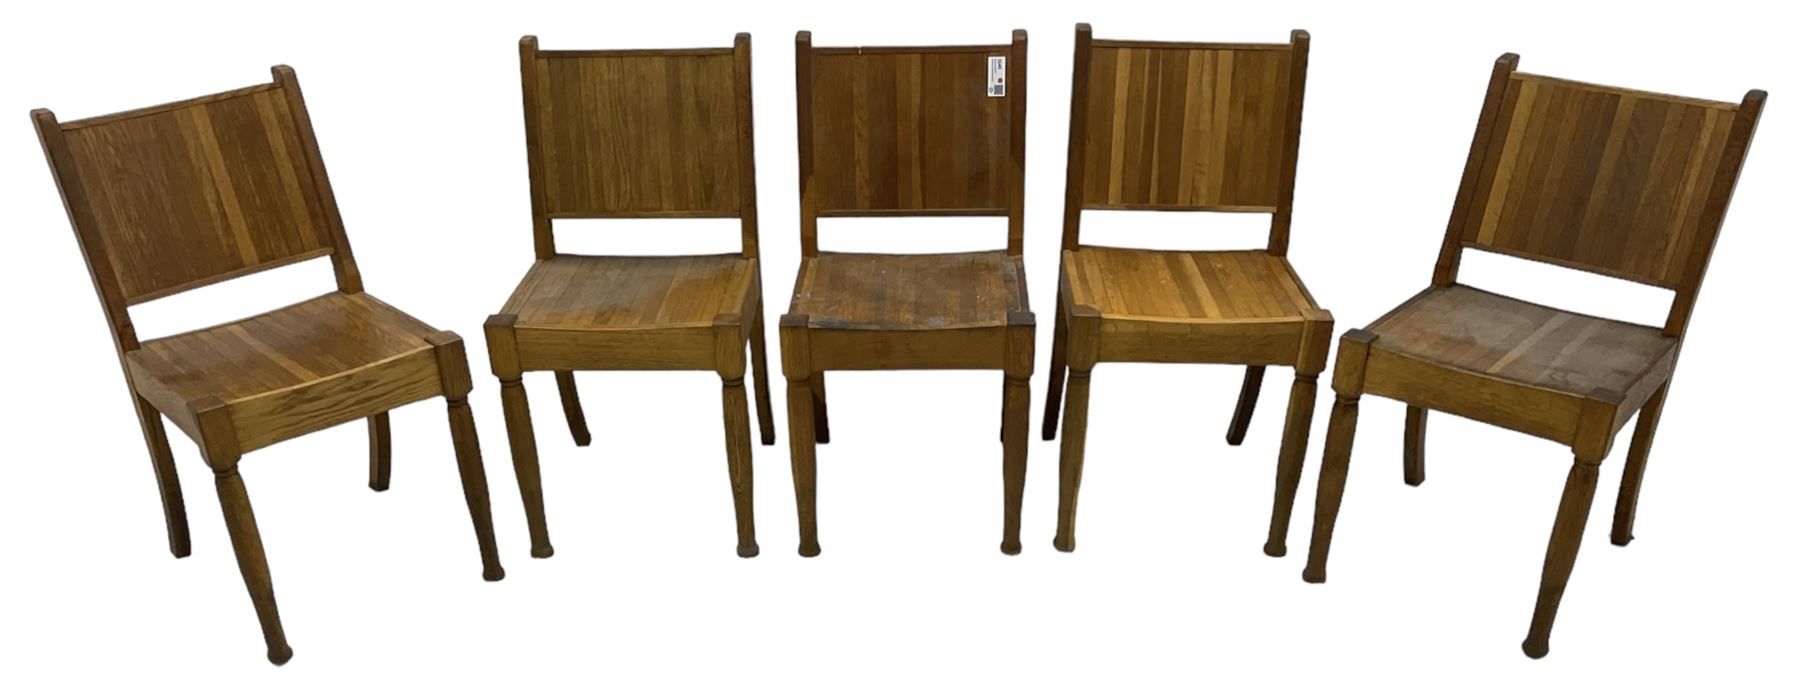 Set of five 20th century oak chairs - Image 2 of 6